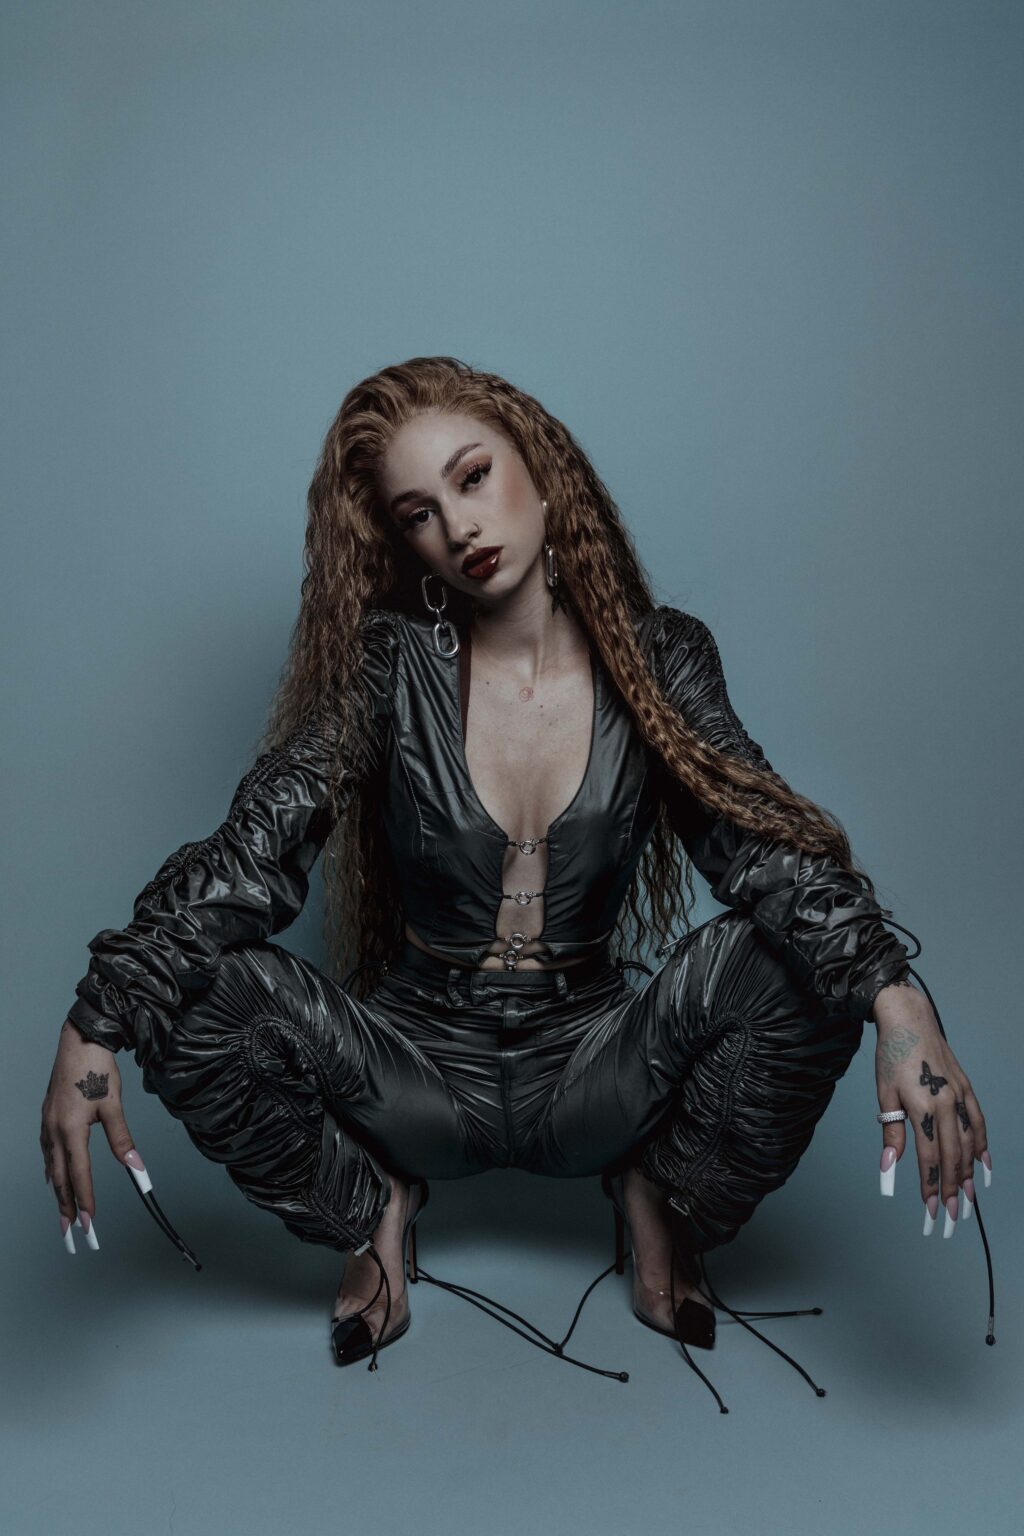 MISS UNDERSTOOD: An Interview with Bhad Bhabie